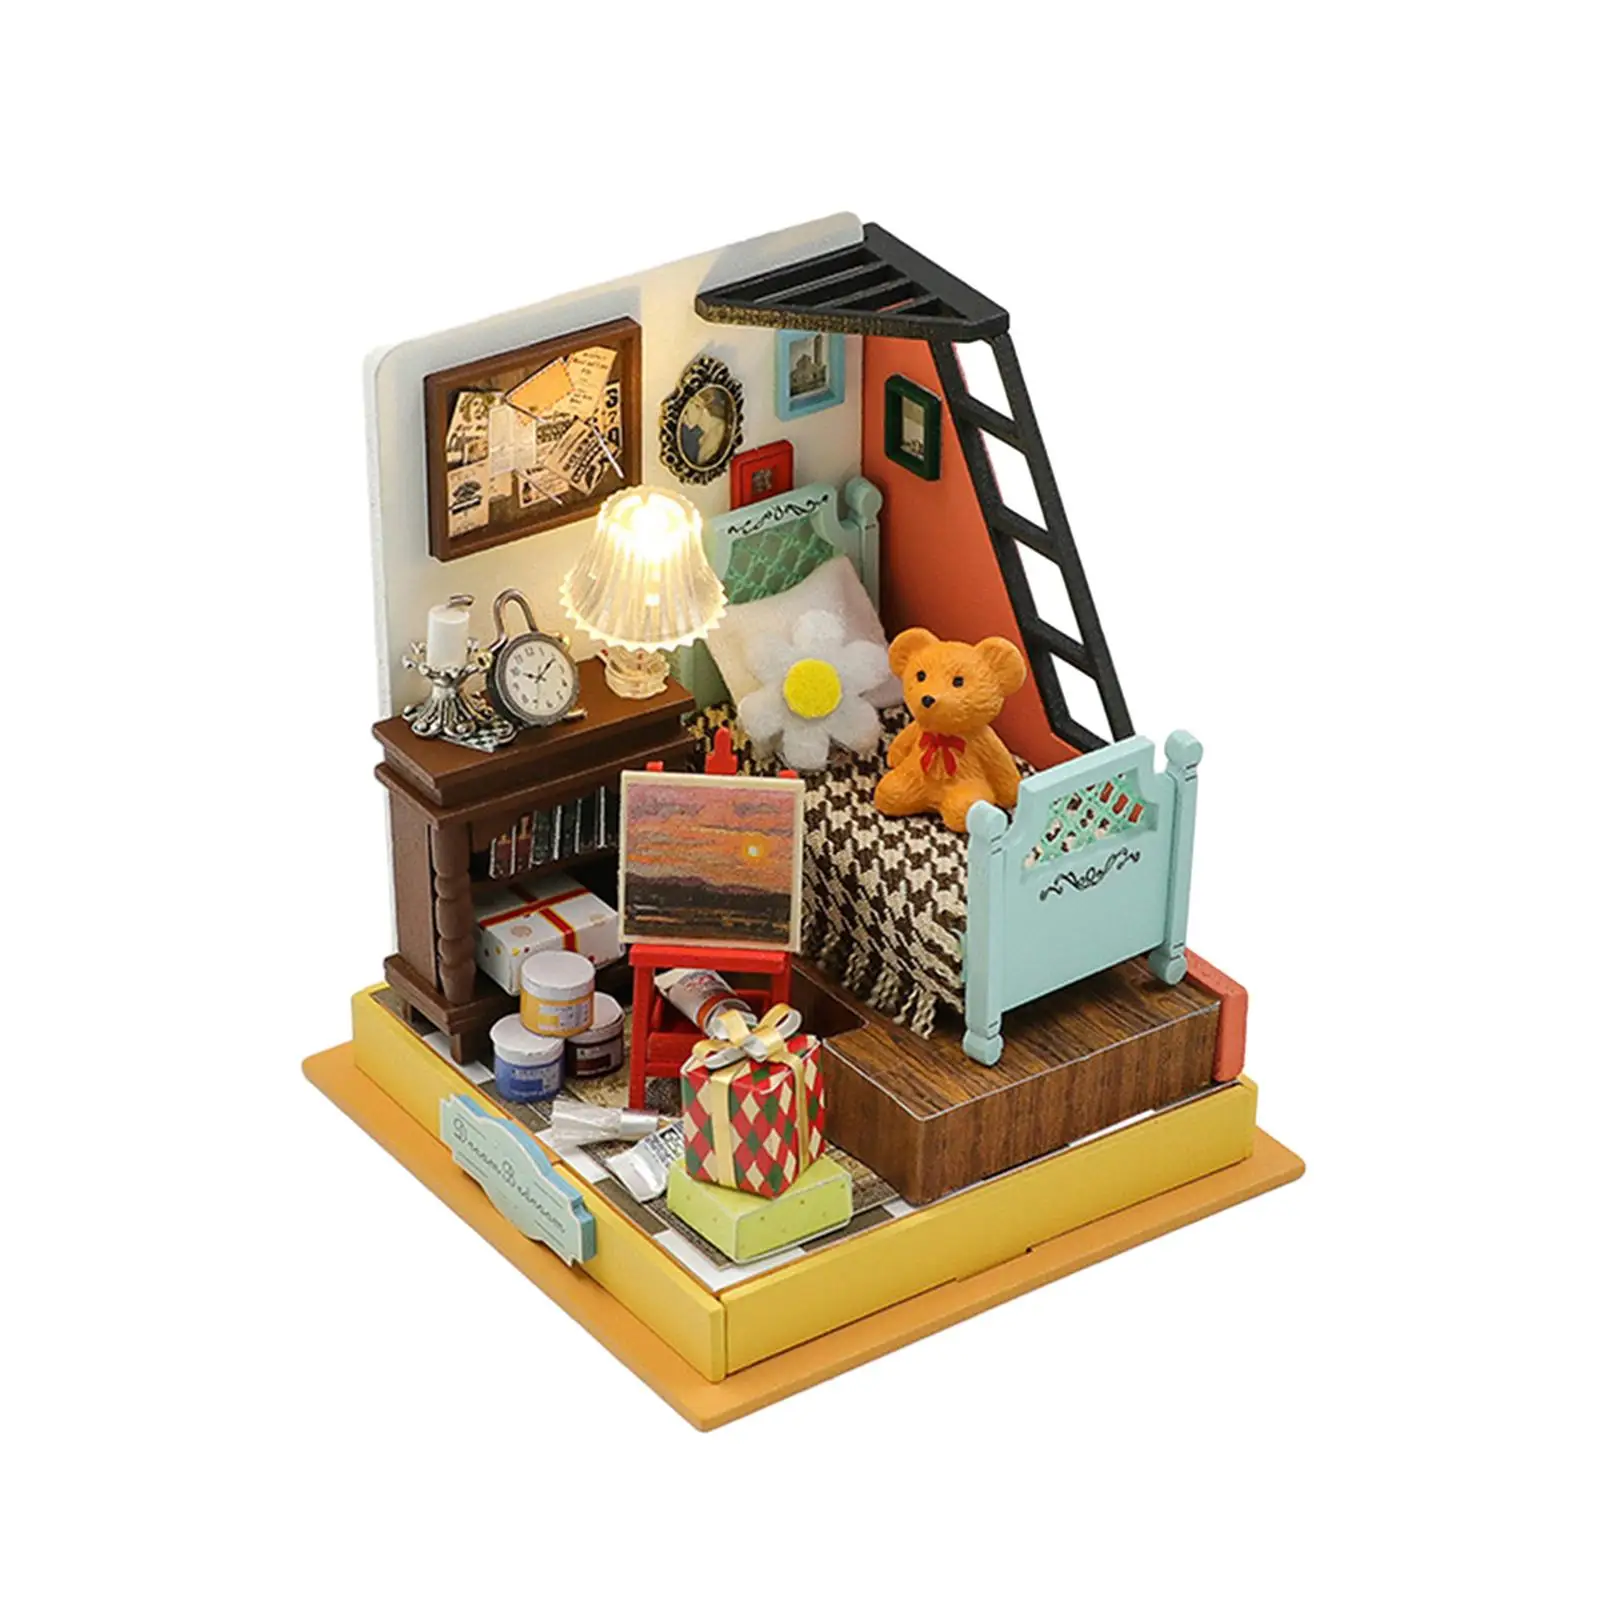 Handcraft Miniature Dollhouse Kits with LED Light Easy to Assemble Decorations Educational Toy 3D Puzzles Wooden Room Box Crafts